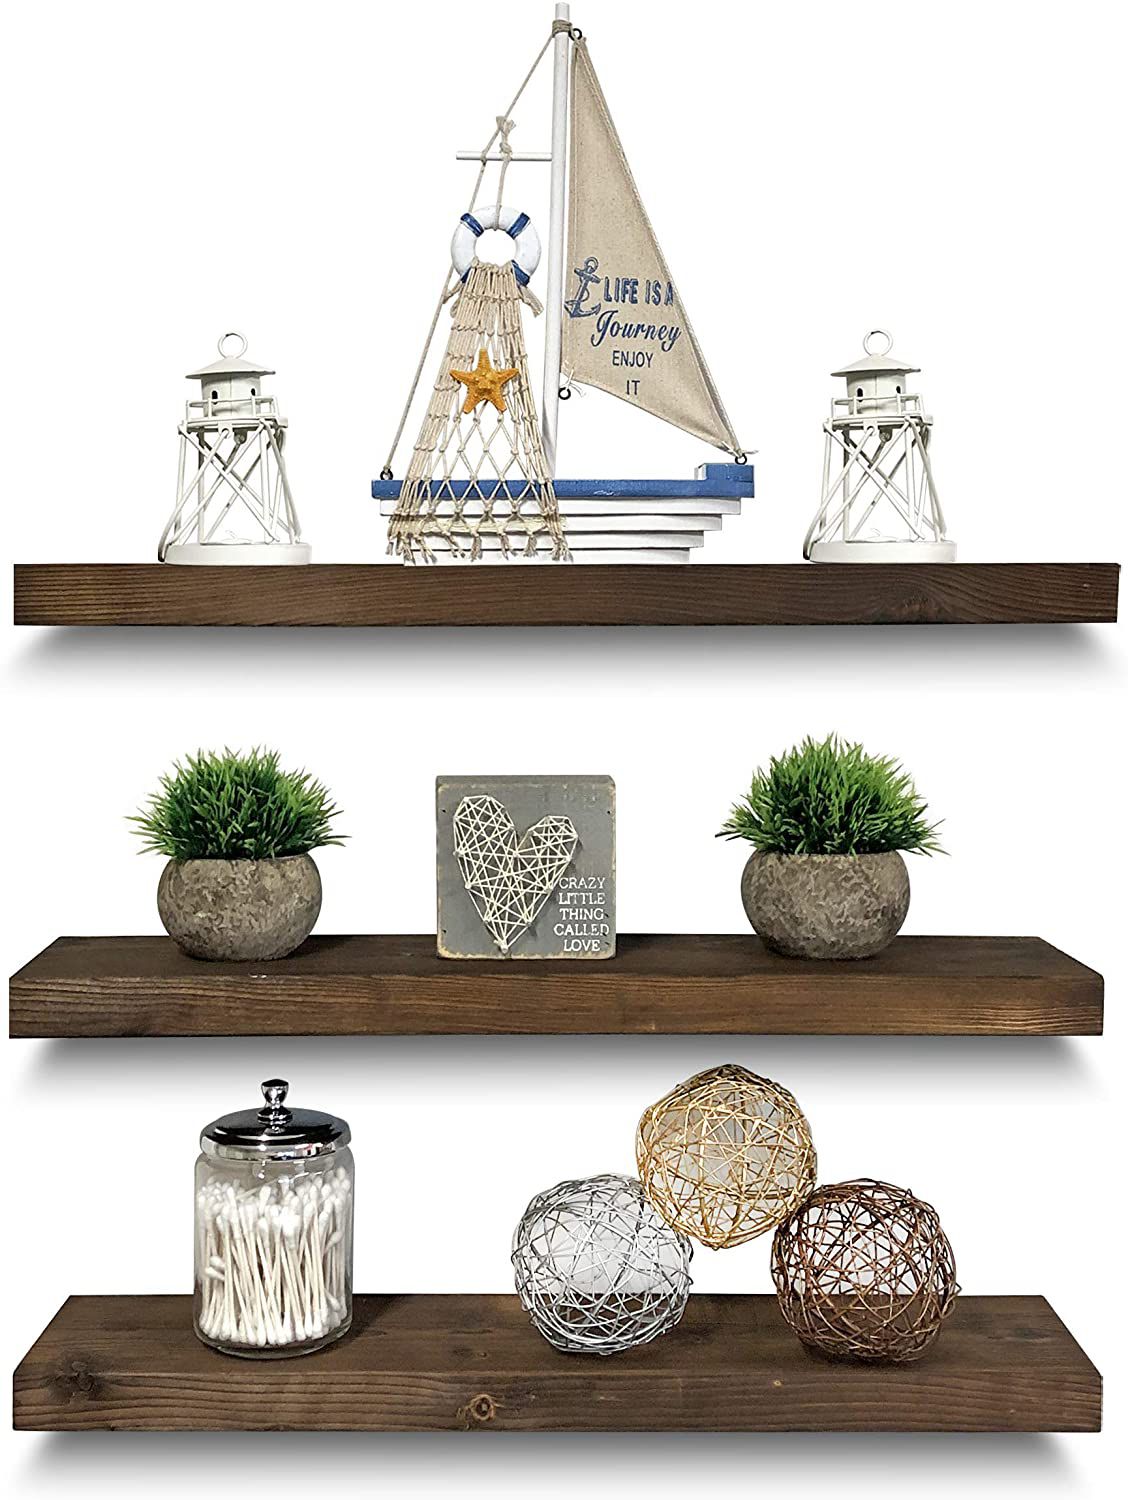 Rustic Farmhouse 3 Tier Floating Wood Shelf - Real Hardwood Floating Wall Shelves (Set of 3), Hardware and Fasteners Included (Walnut, 24")